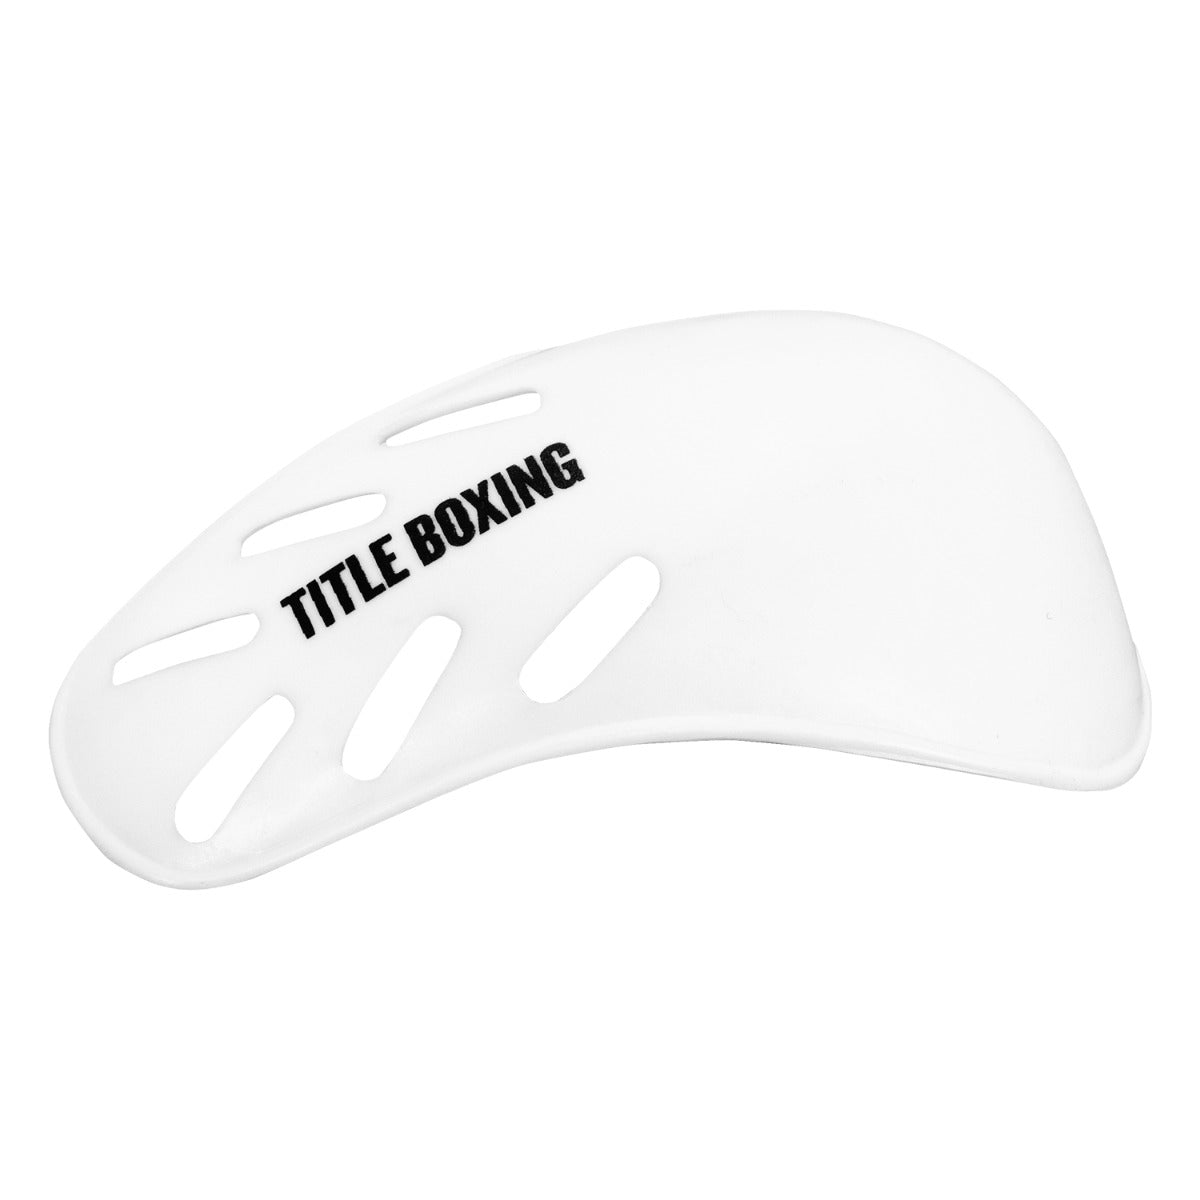 TITLE Boxing Turtle Shells X-Tend Protective Cups